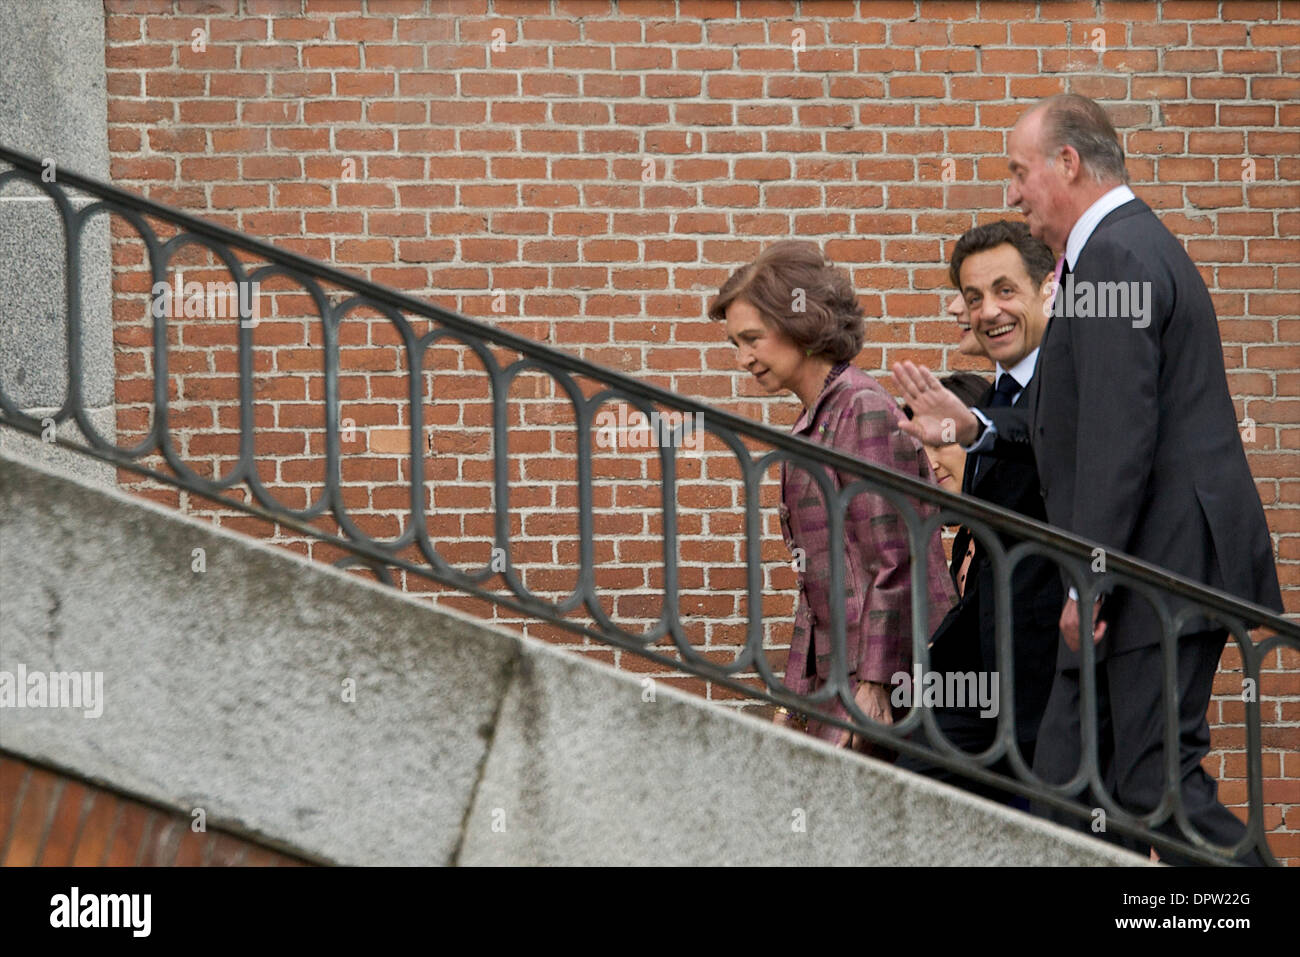 Apr 27, 2009 - Madrid, Spain - The Prado Museum. French President NICOLAS SARKOZY, center,  and his wife visit the El Prado Museum with Spain's KING JUAN CARLOS I, right, and QUEEN SOFIA, left.  (Credit Image: © Jose Perez Gegundez/ZUMA Press) RESTRICTIONS: * Spain Rights OUT * Stock Photo